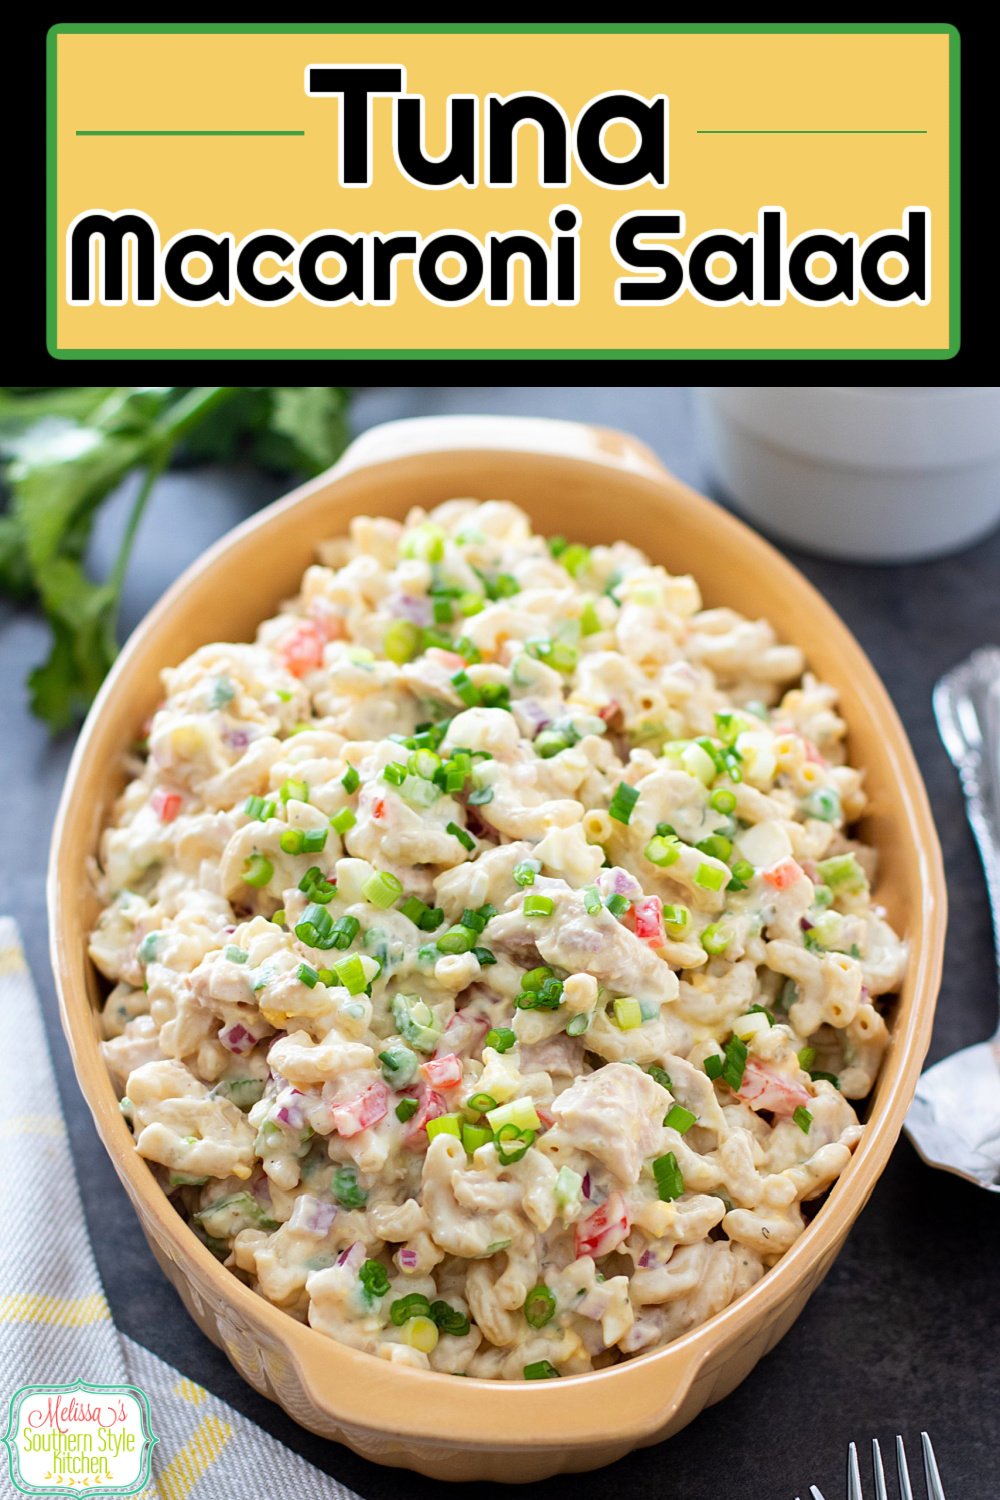 This Southern Tuna Macaroni Salad Recipe is packed with albacore tuna, macaroni and fresh vegetables tossed with a creamy homemade dressing #macaronisalad #southernsalads #tunamacaronisalad #saladrecipes #bestmacaronisalad #saladeecipes #easymacaronisalad via @melissasssk